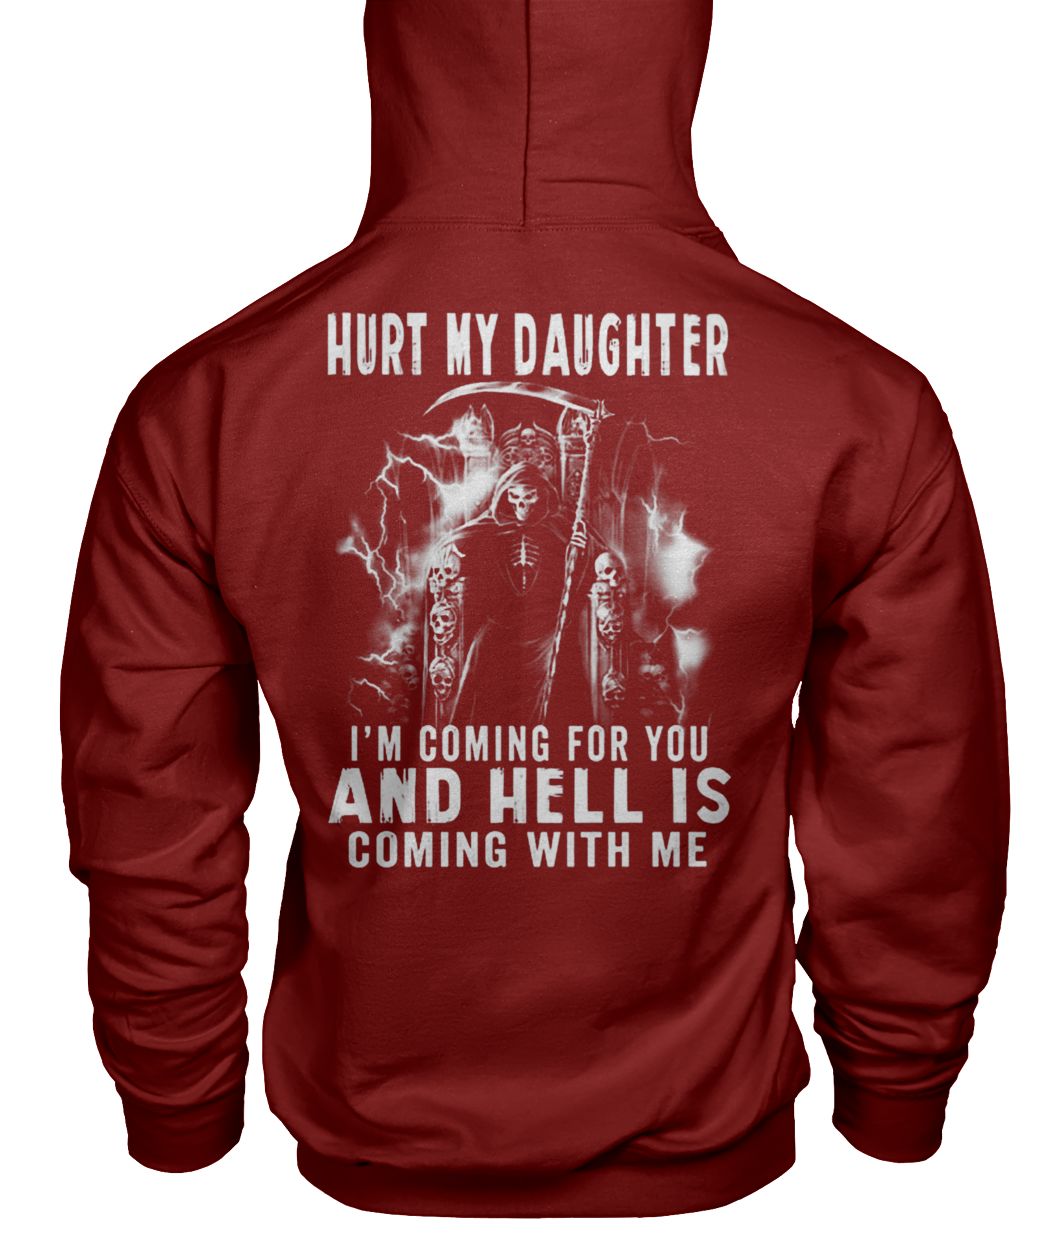 Hurt my daughter I'm coming for you and hell is coming with me gildan hoodie